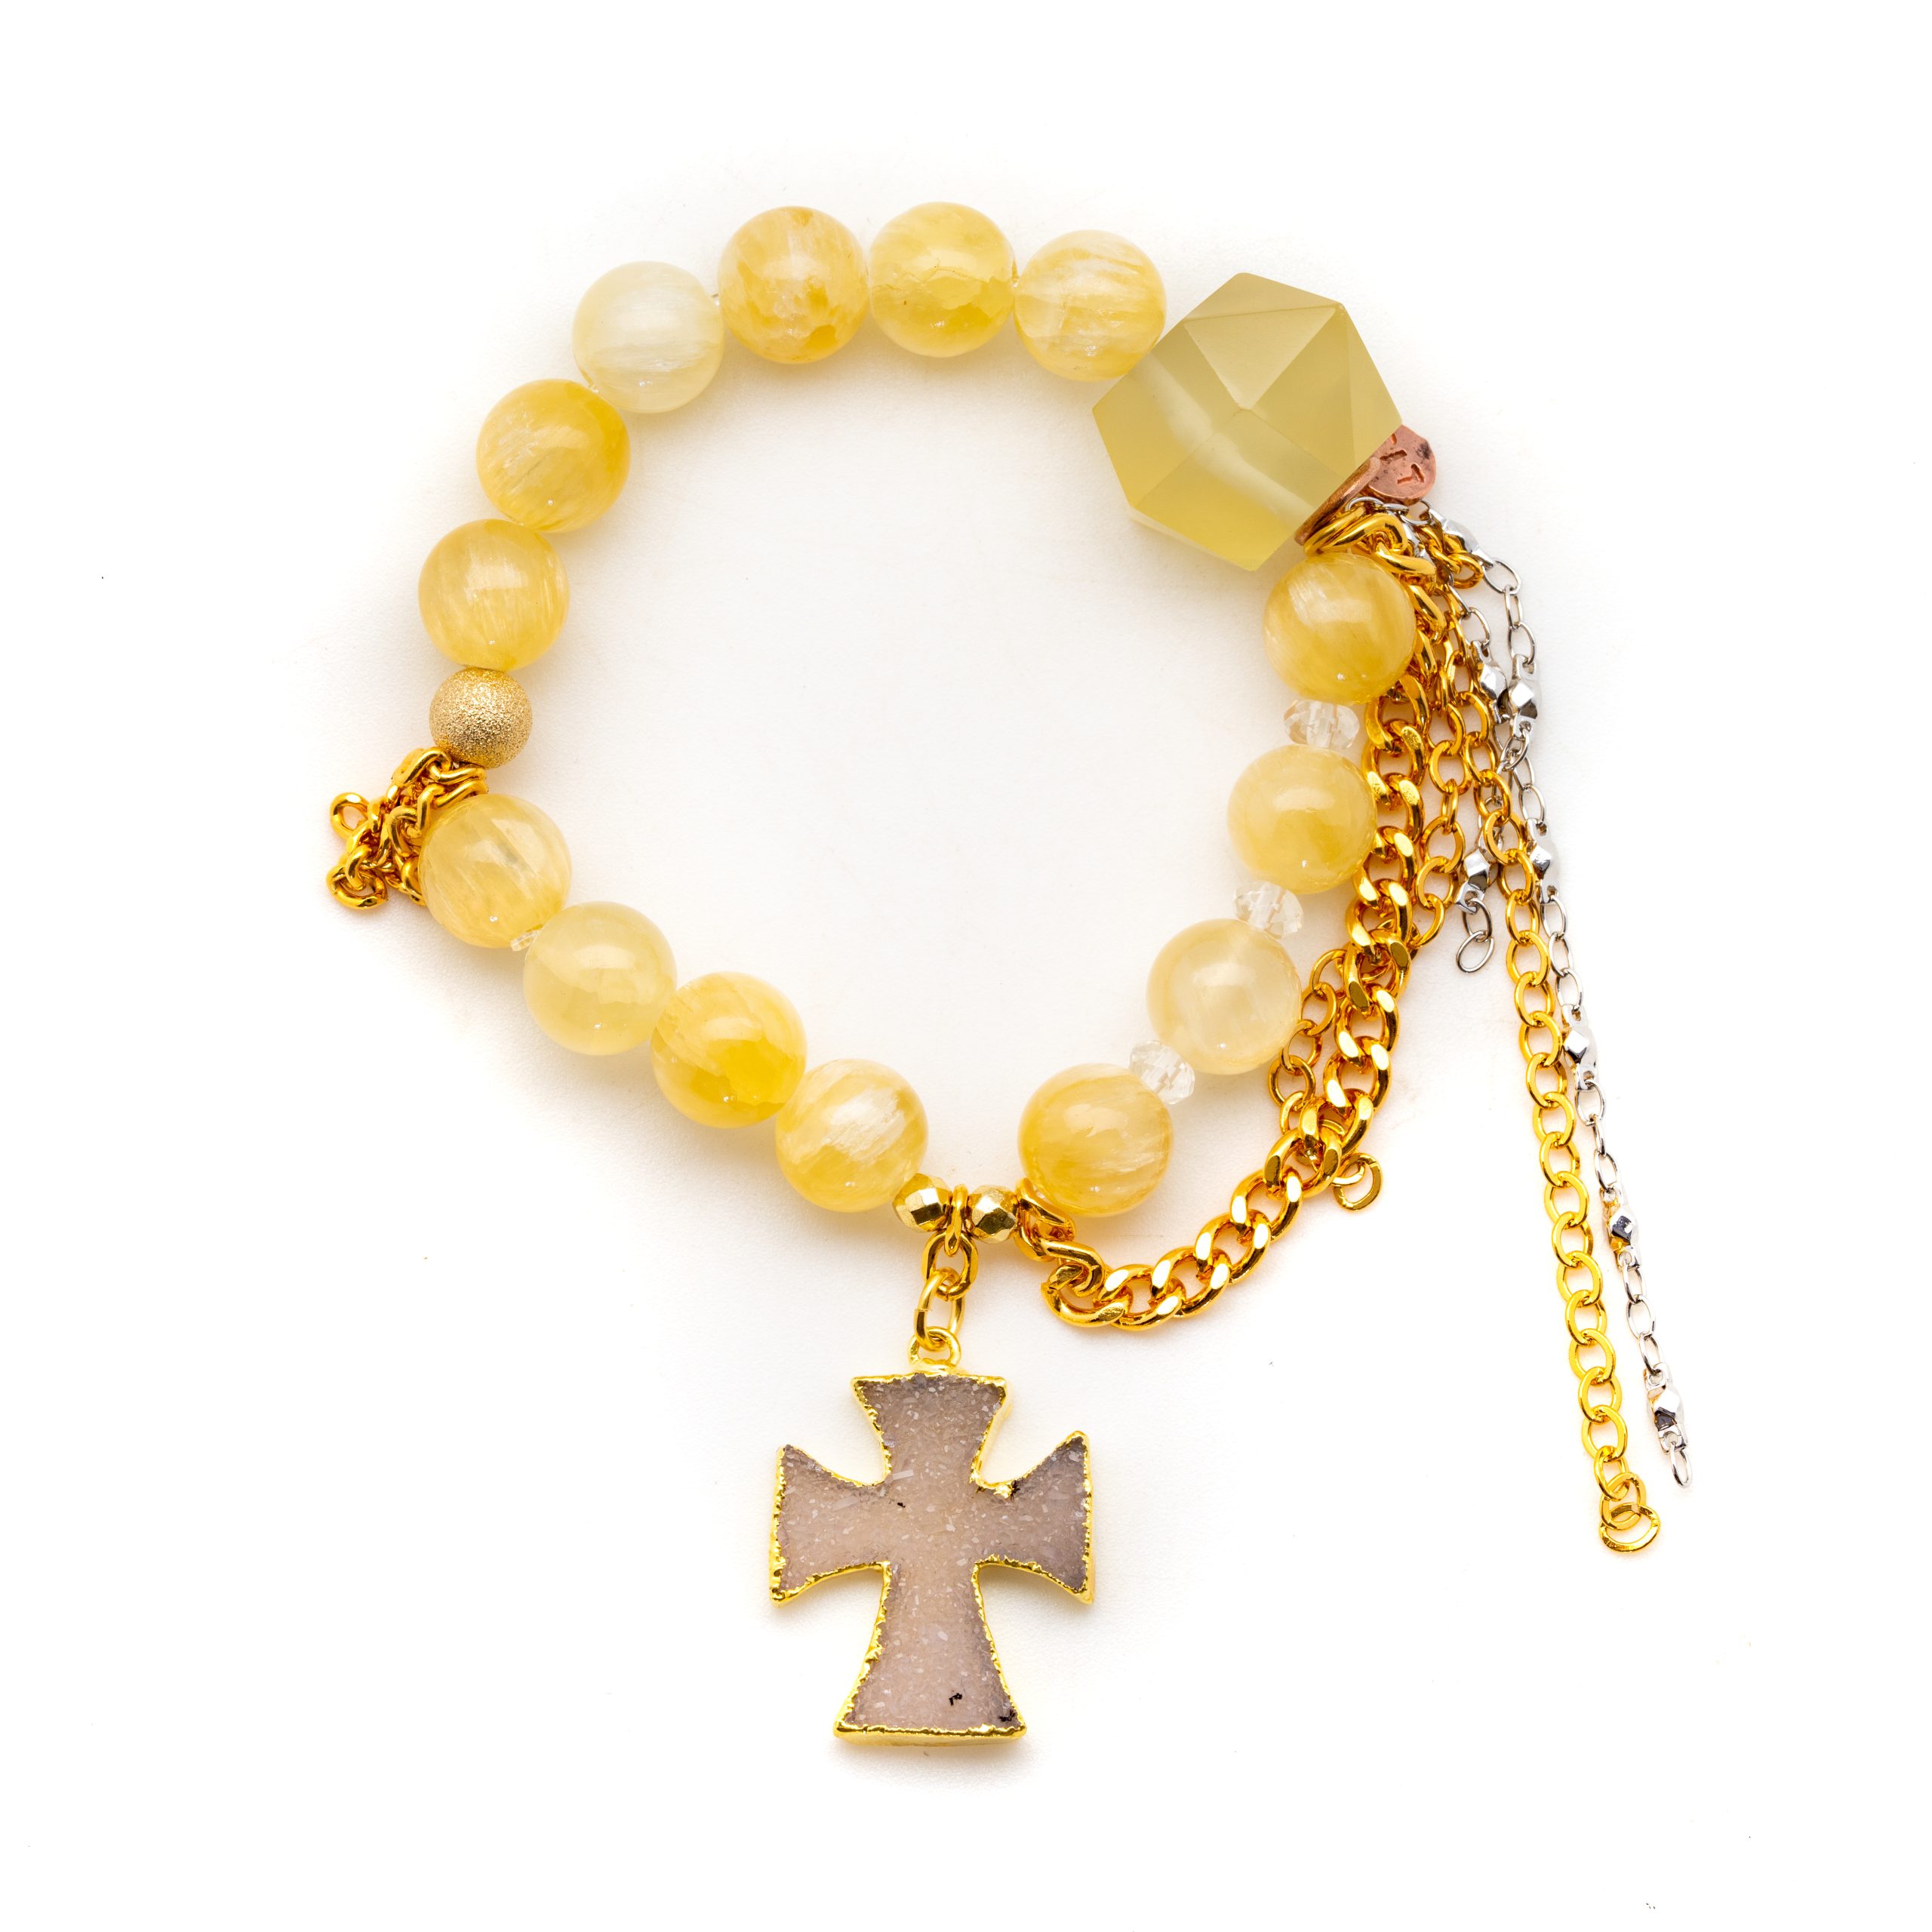 Yellow Selenite with a Druzy Cross